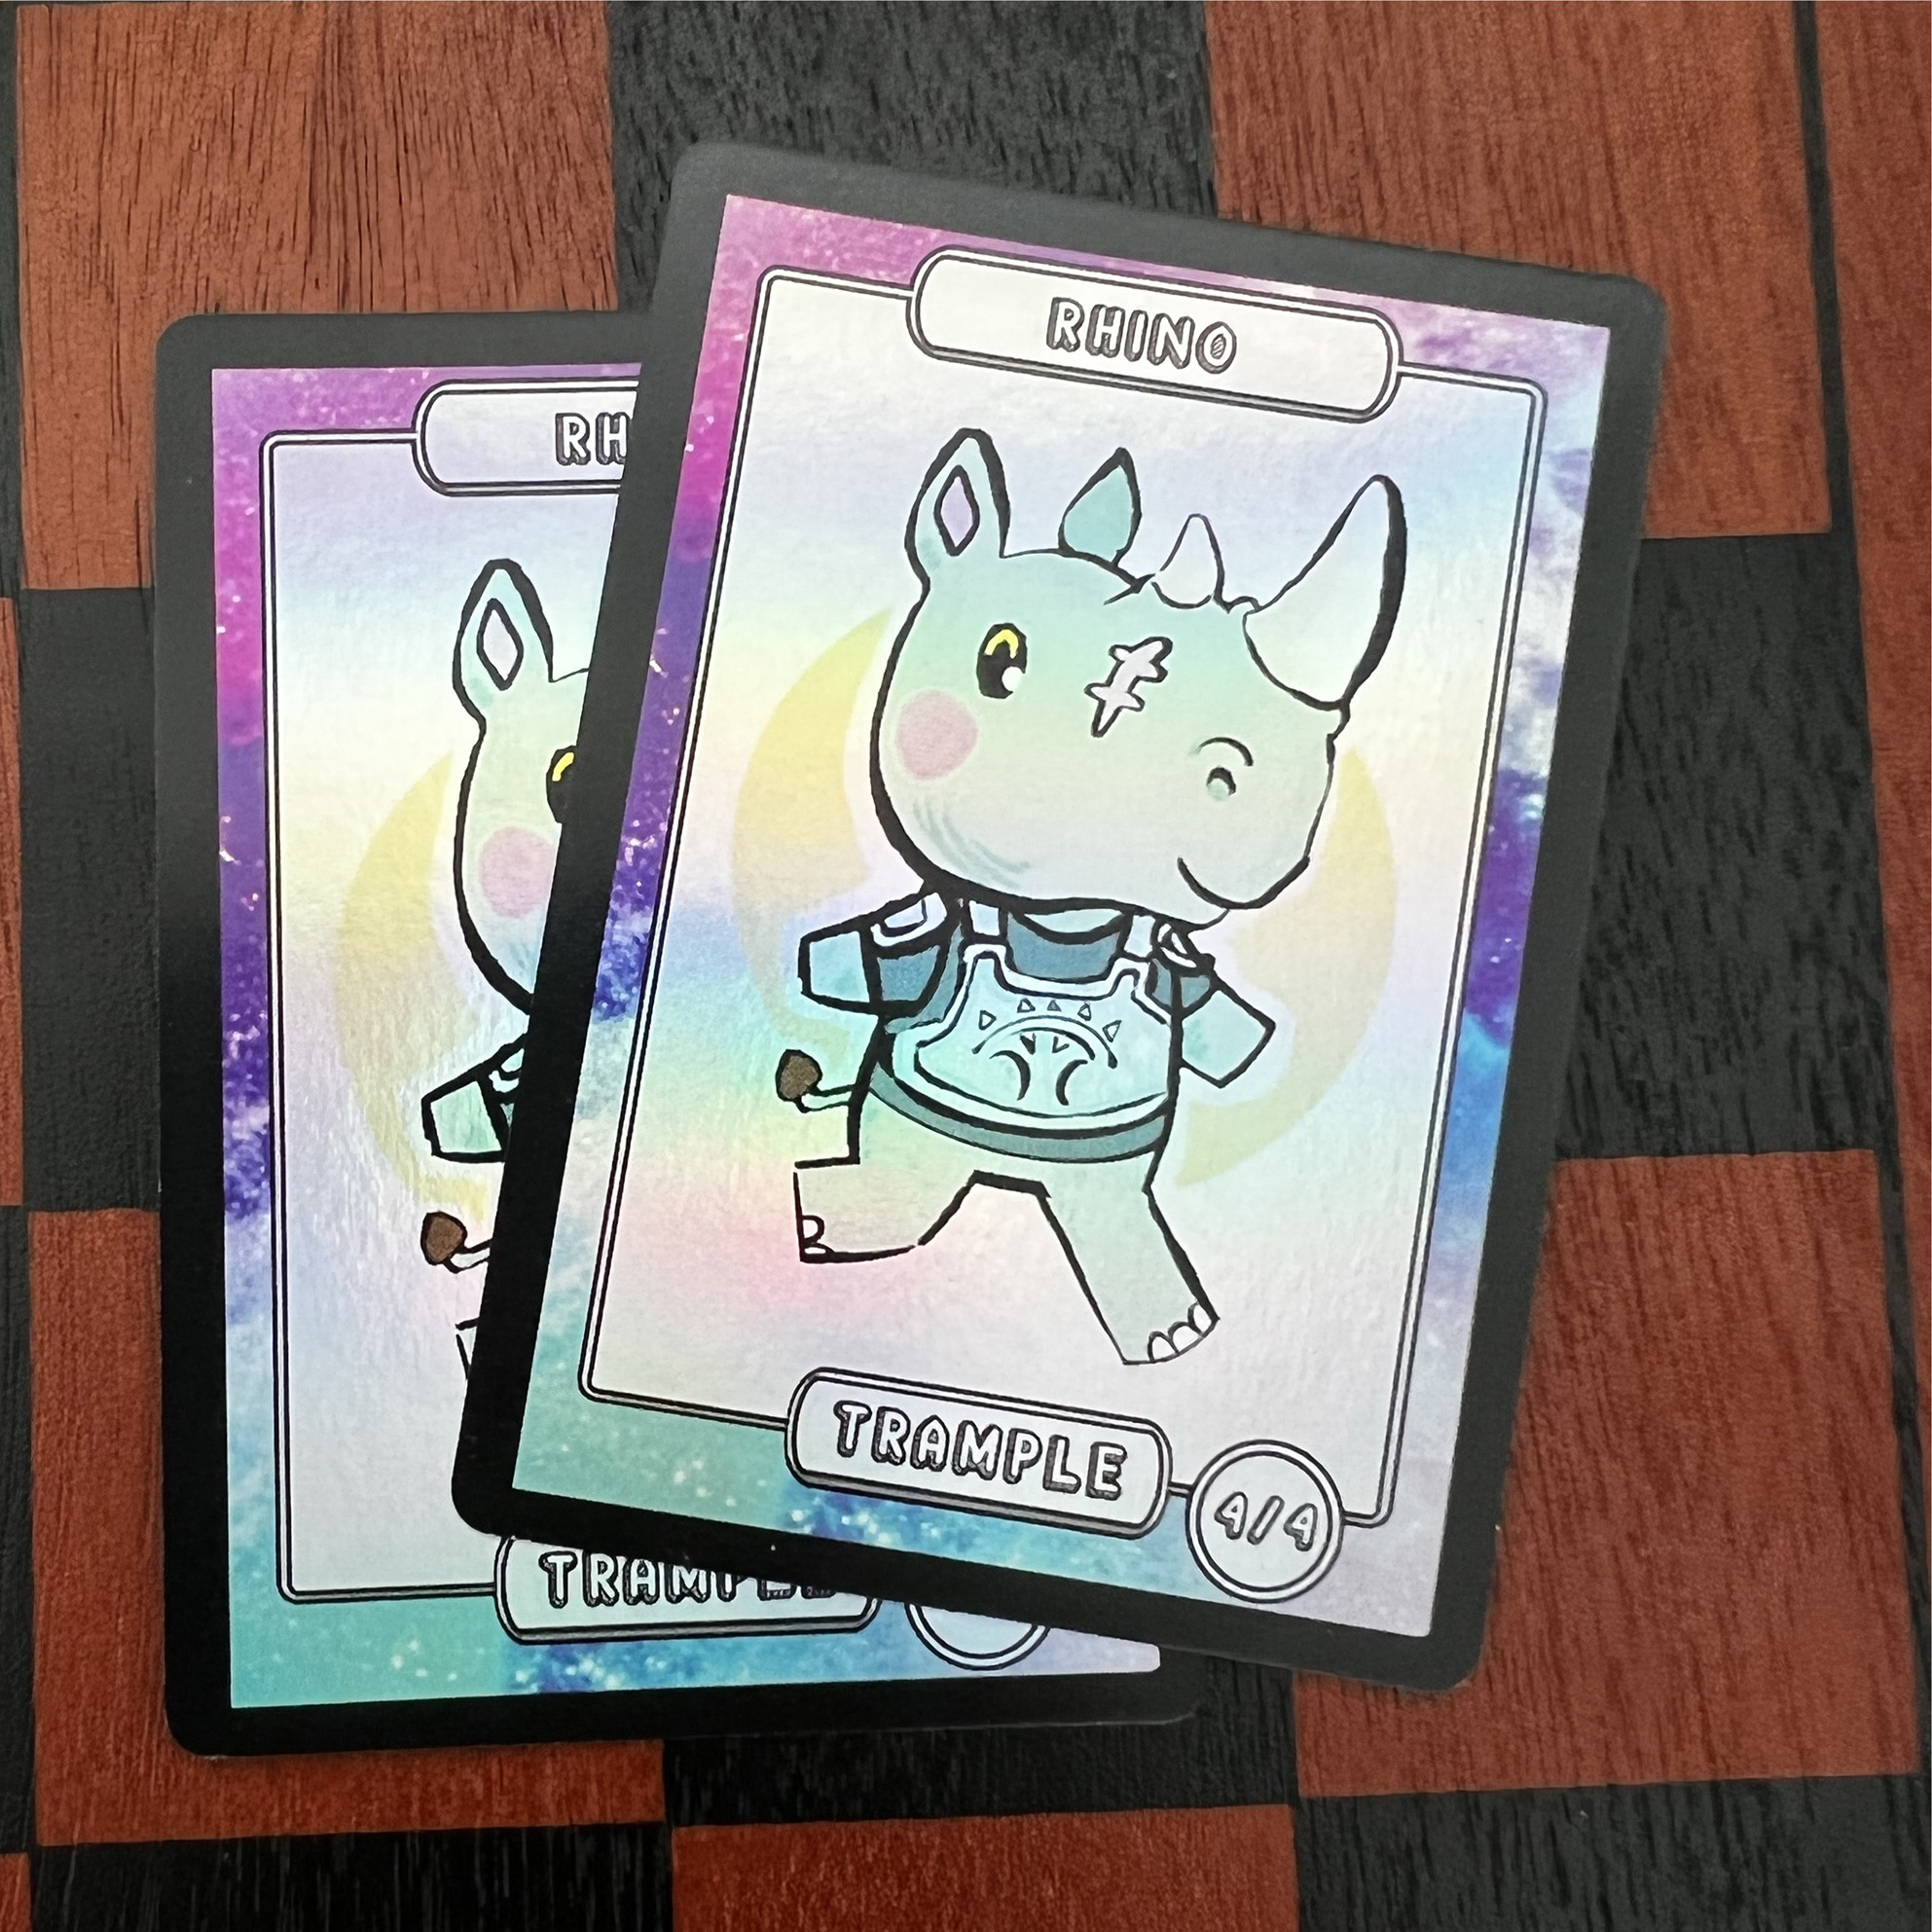 Holographic Perfect Fits ⋆ Prismatic Defender